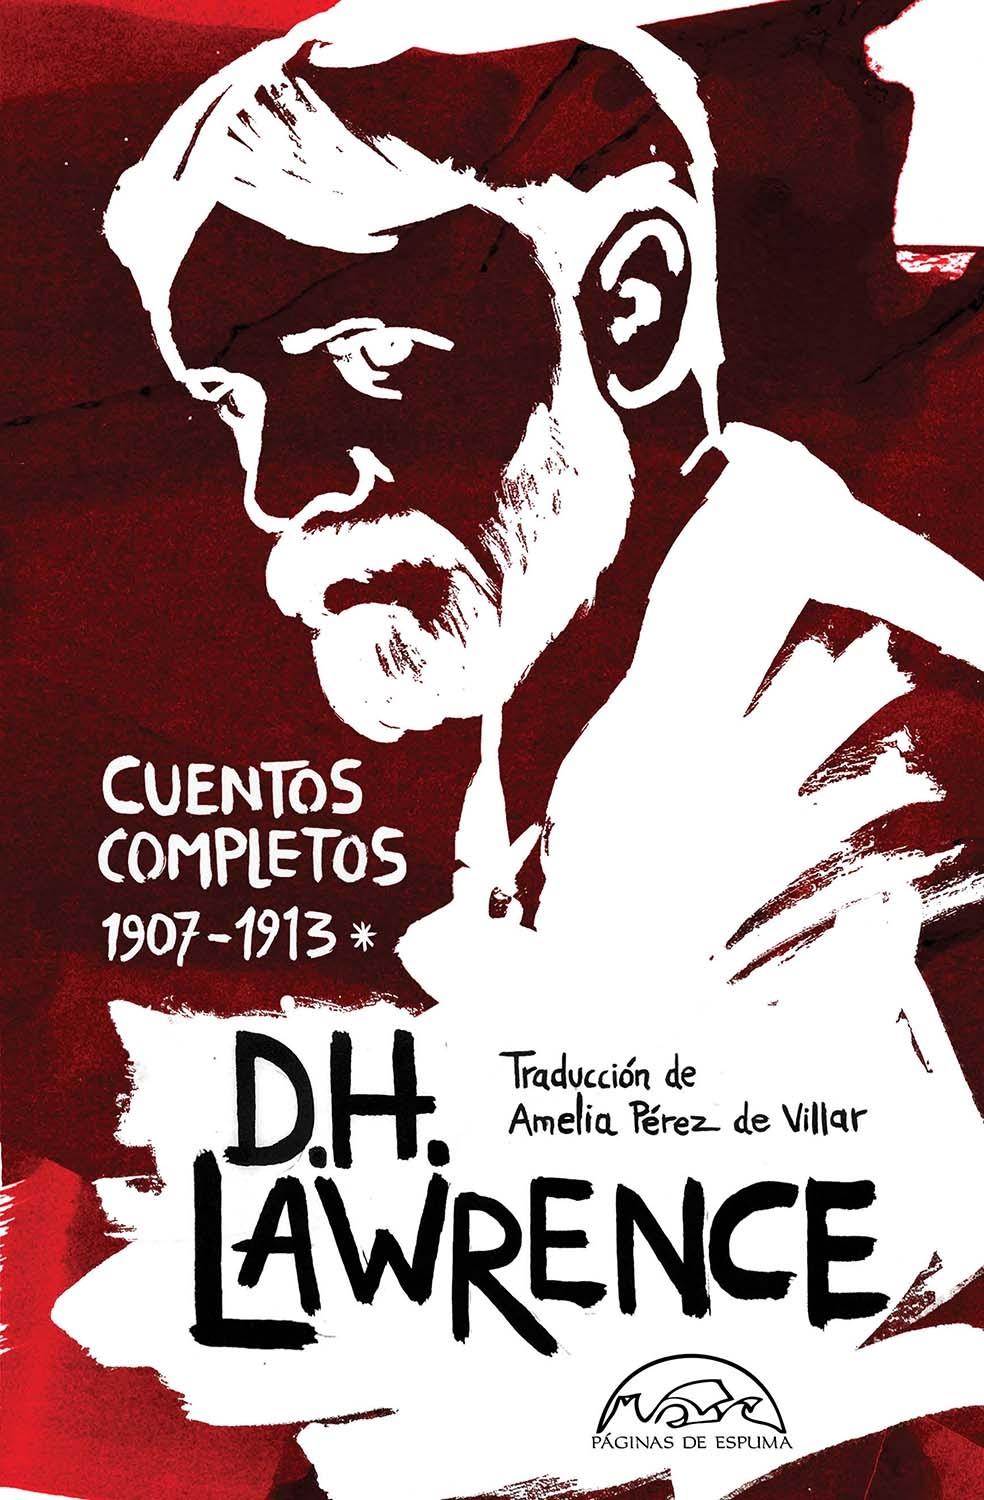 Cuentos Completos I (1907-1913) D.H Lawrence. 